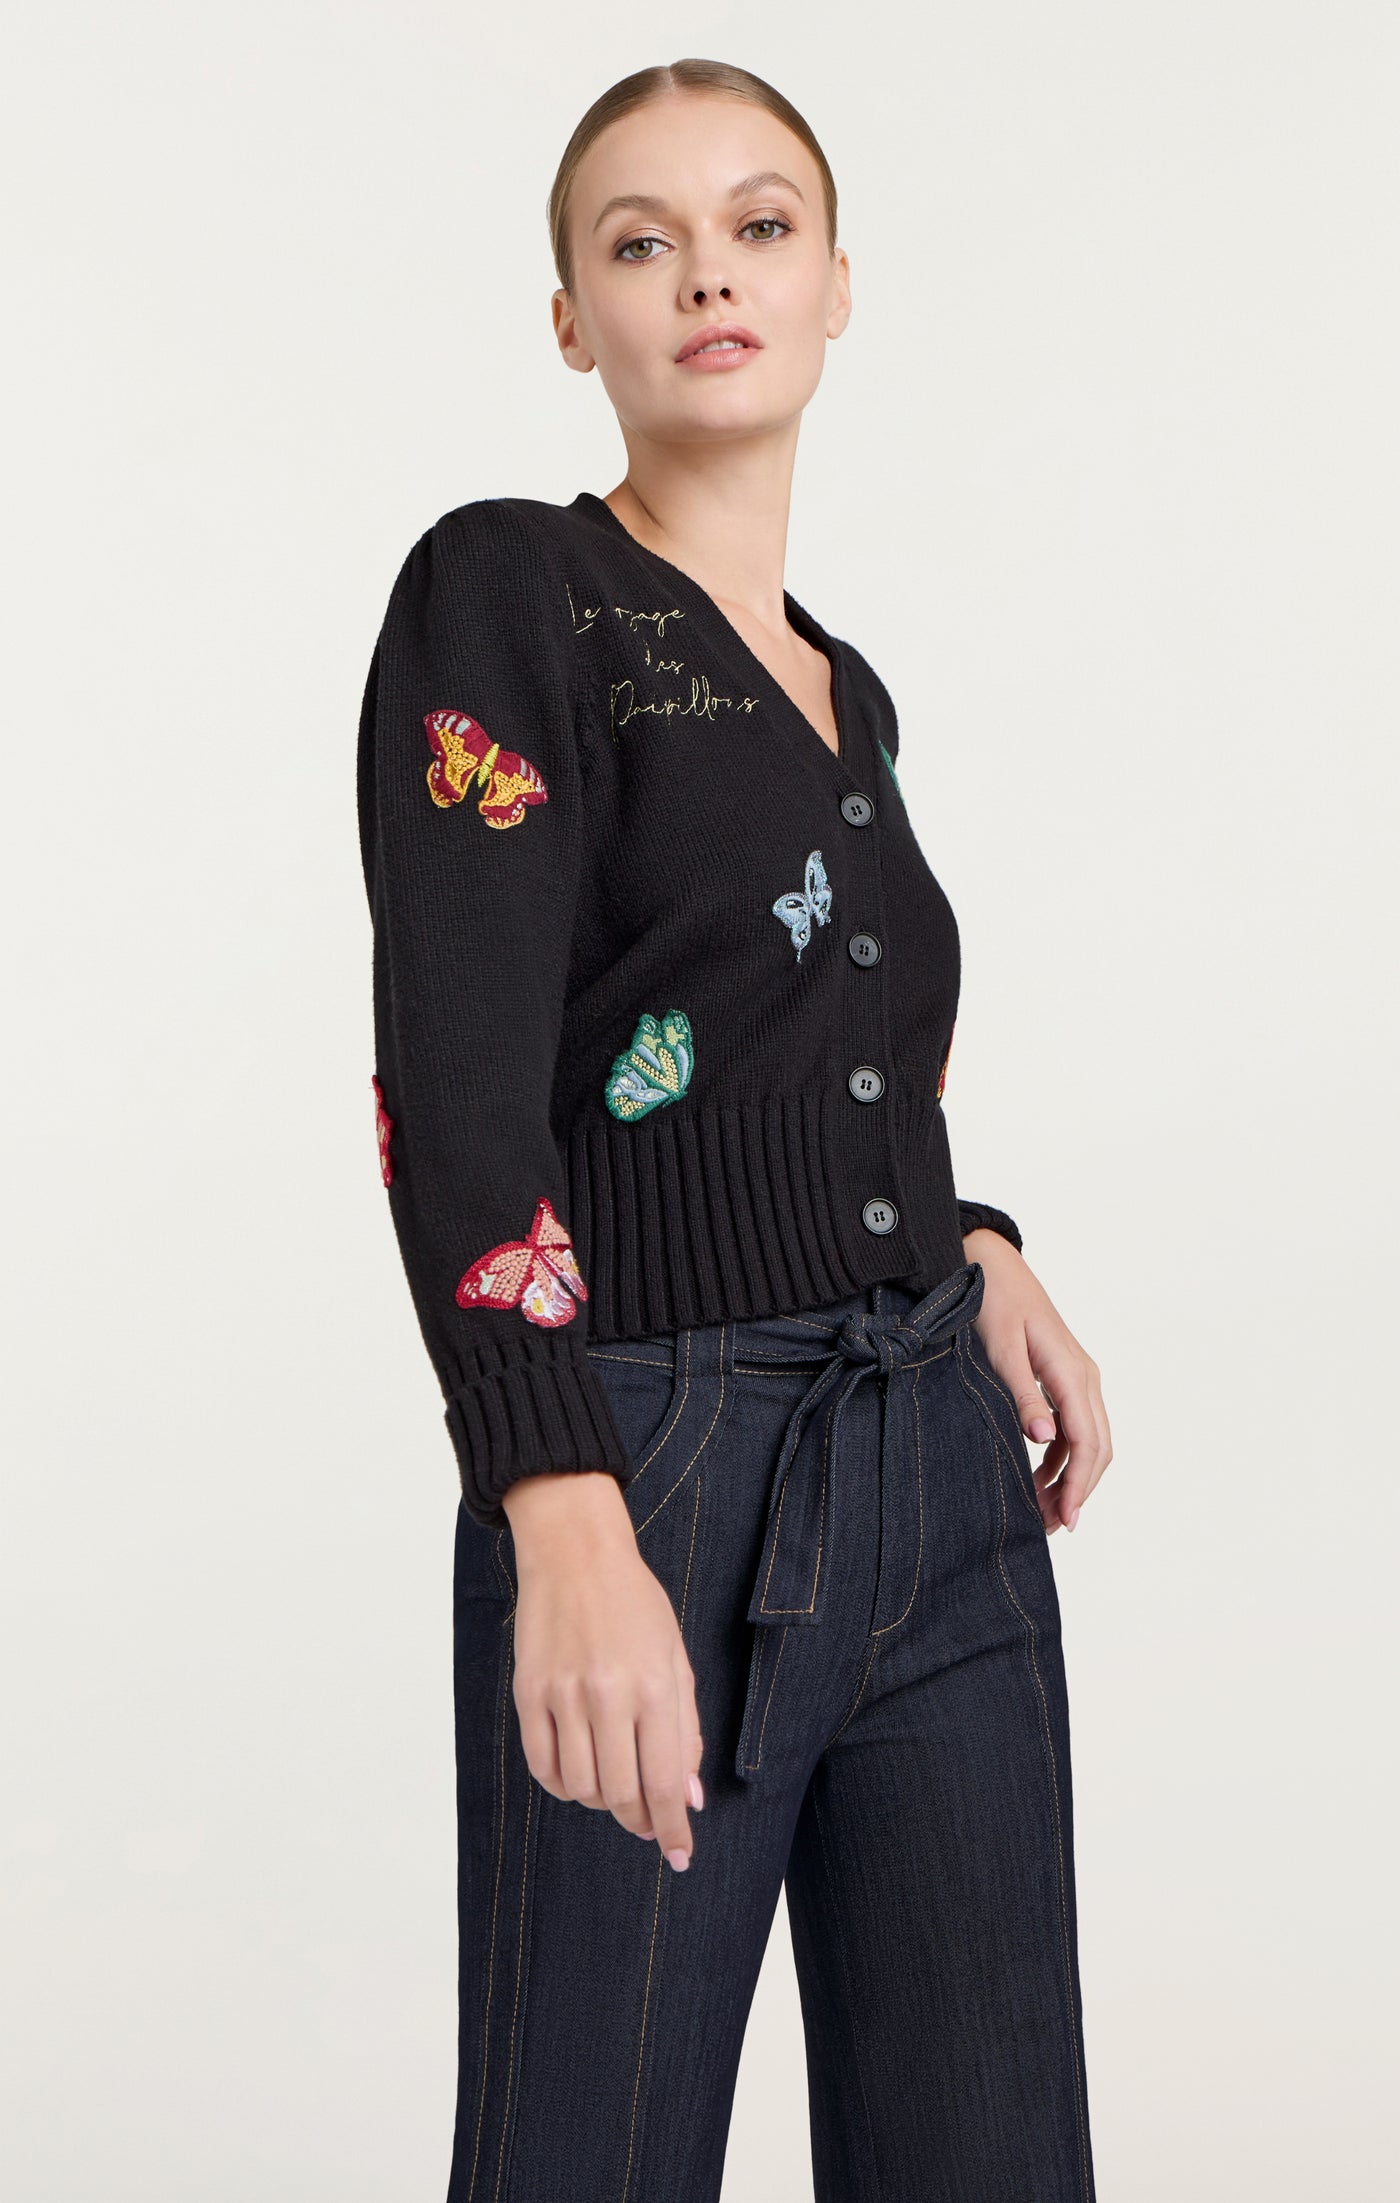 Butterfly Embellished Morgan Cardigan